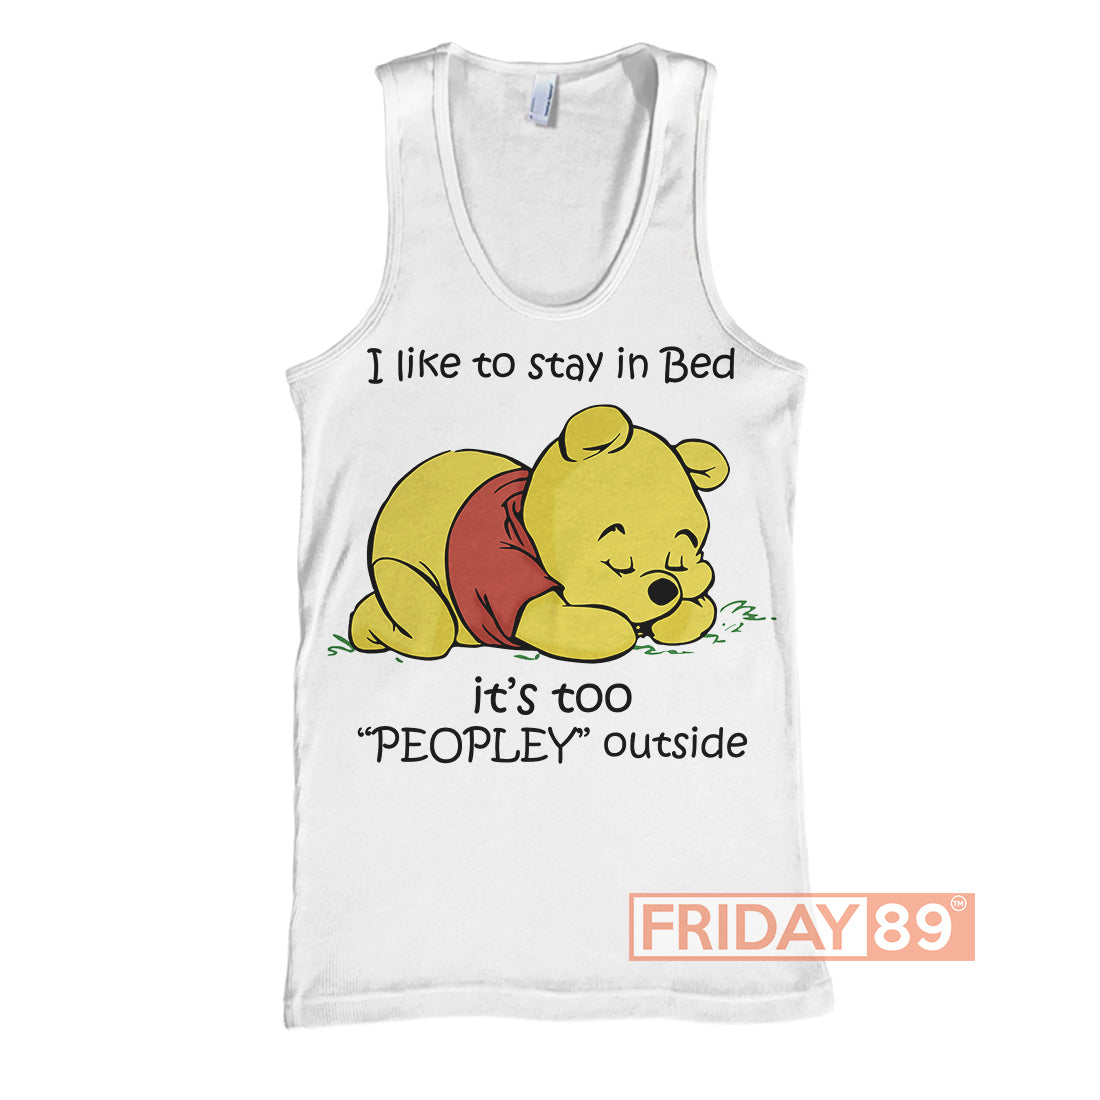 Unifinz DN WTP T-shirt I Like To Stay In Bed - Pooh Bear T-shirt Amazing DN WTP Hoodie Sweater Tank 2025